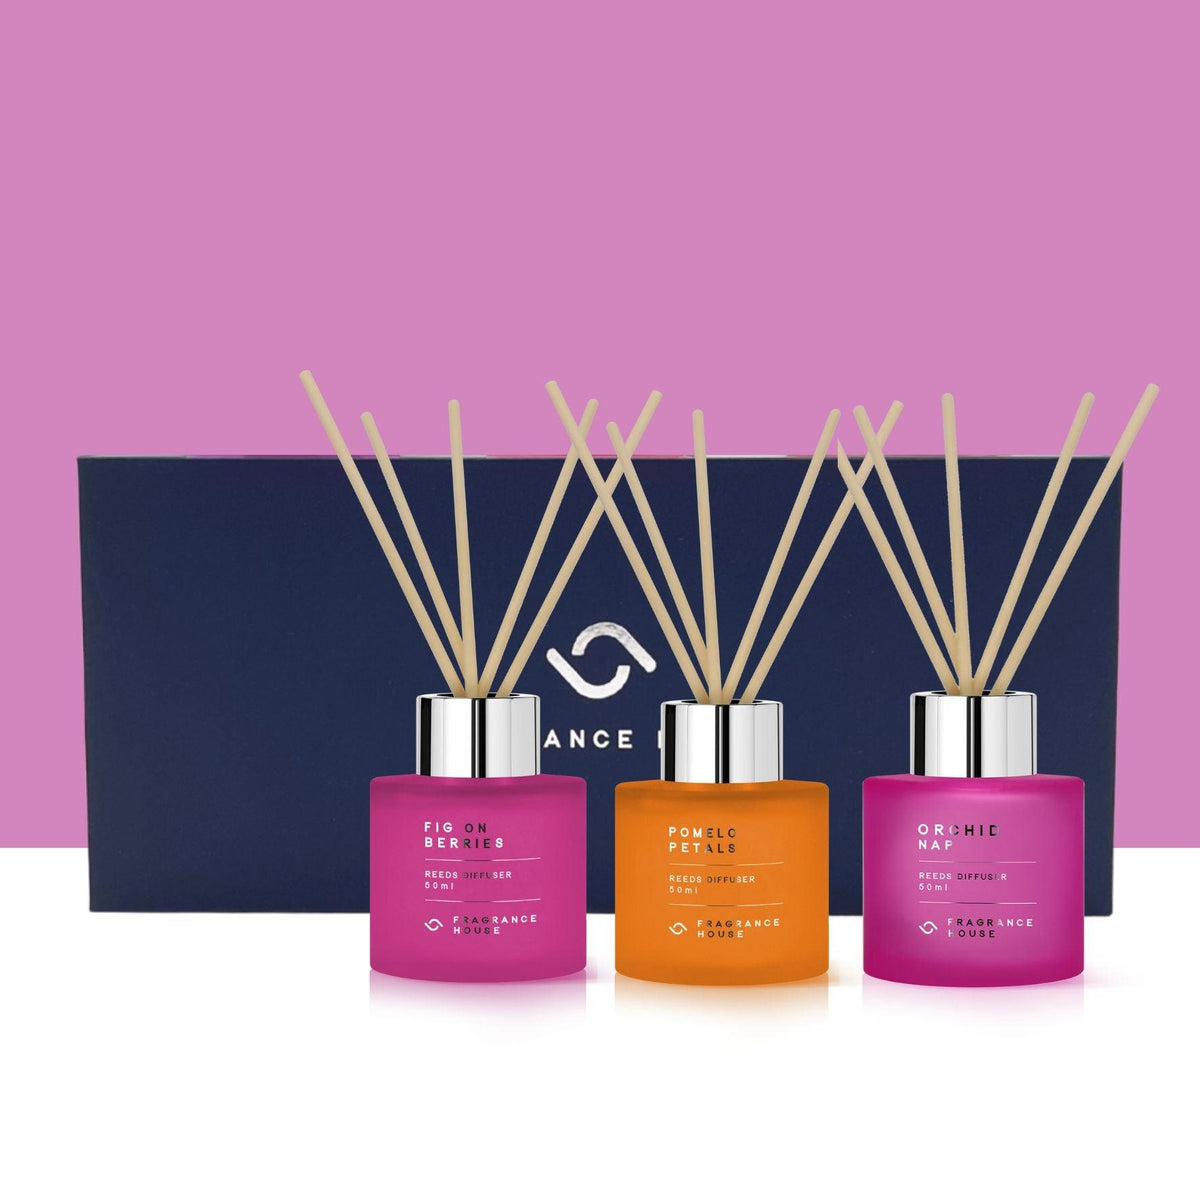 【Gift Set 50ml Diffuser Set (With gift box) - FIG ON BERRIES | POMELO PETALS | ORCHID NAP】 - Fragrance House HK